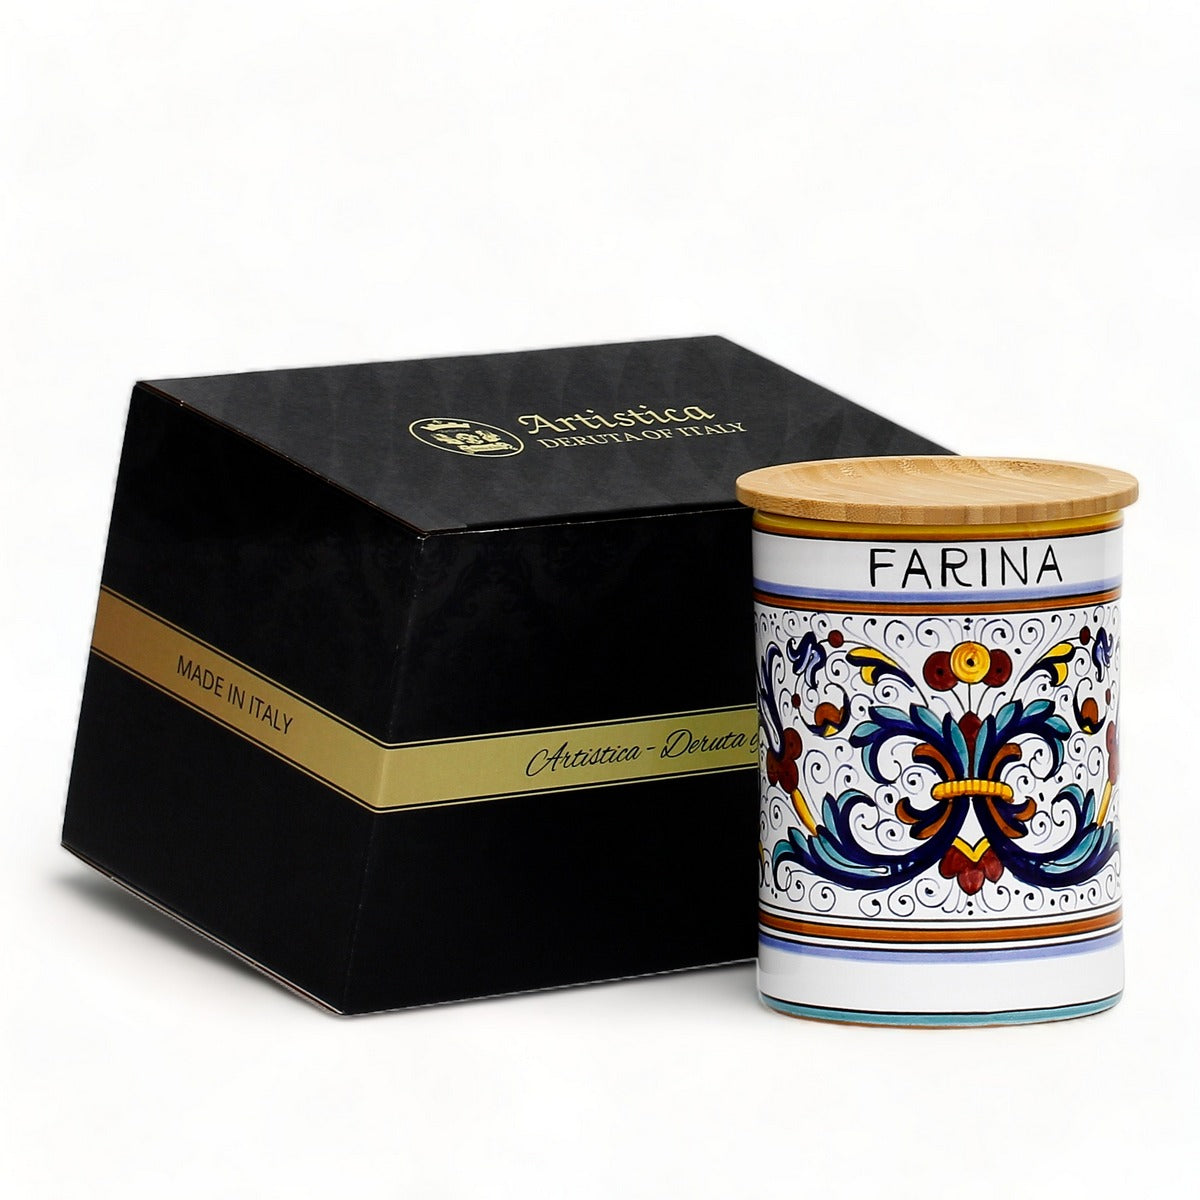 GIFT BOX: With authentic Deruta hand painted ceramic - NEW! Farina (Flour) Canister with Bamboo Sealing Lid Ricco Deruta Design